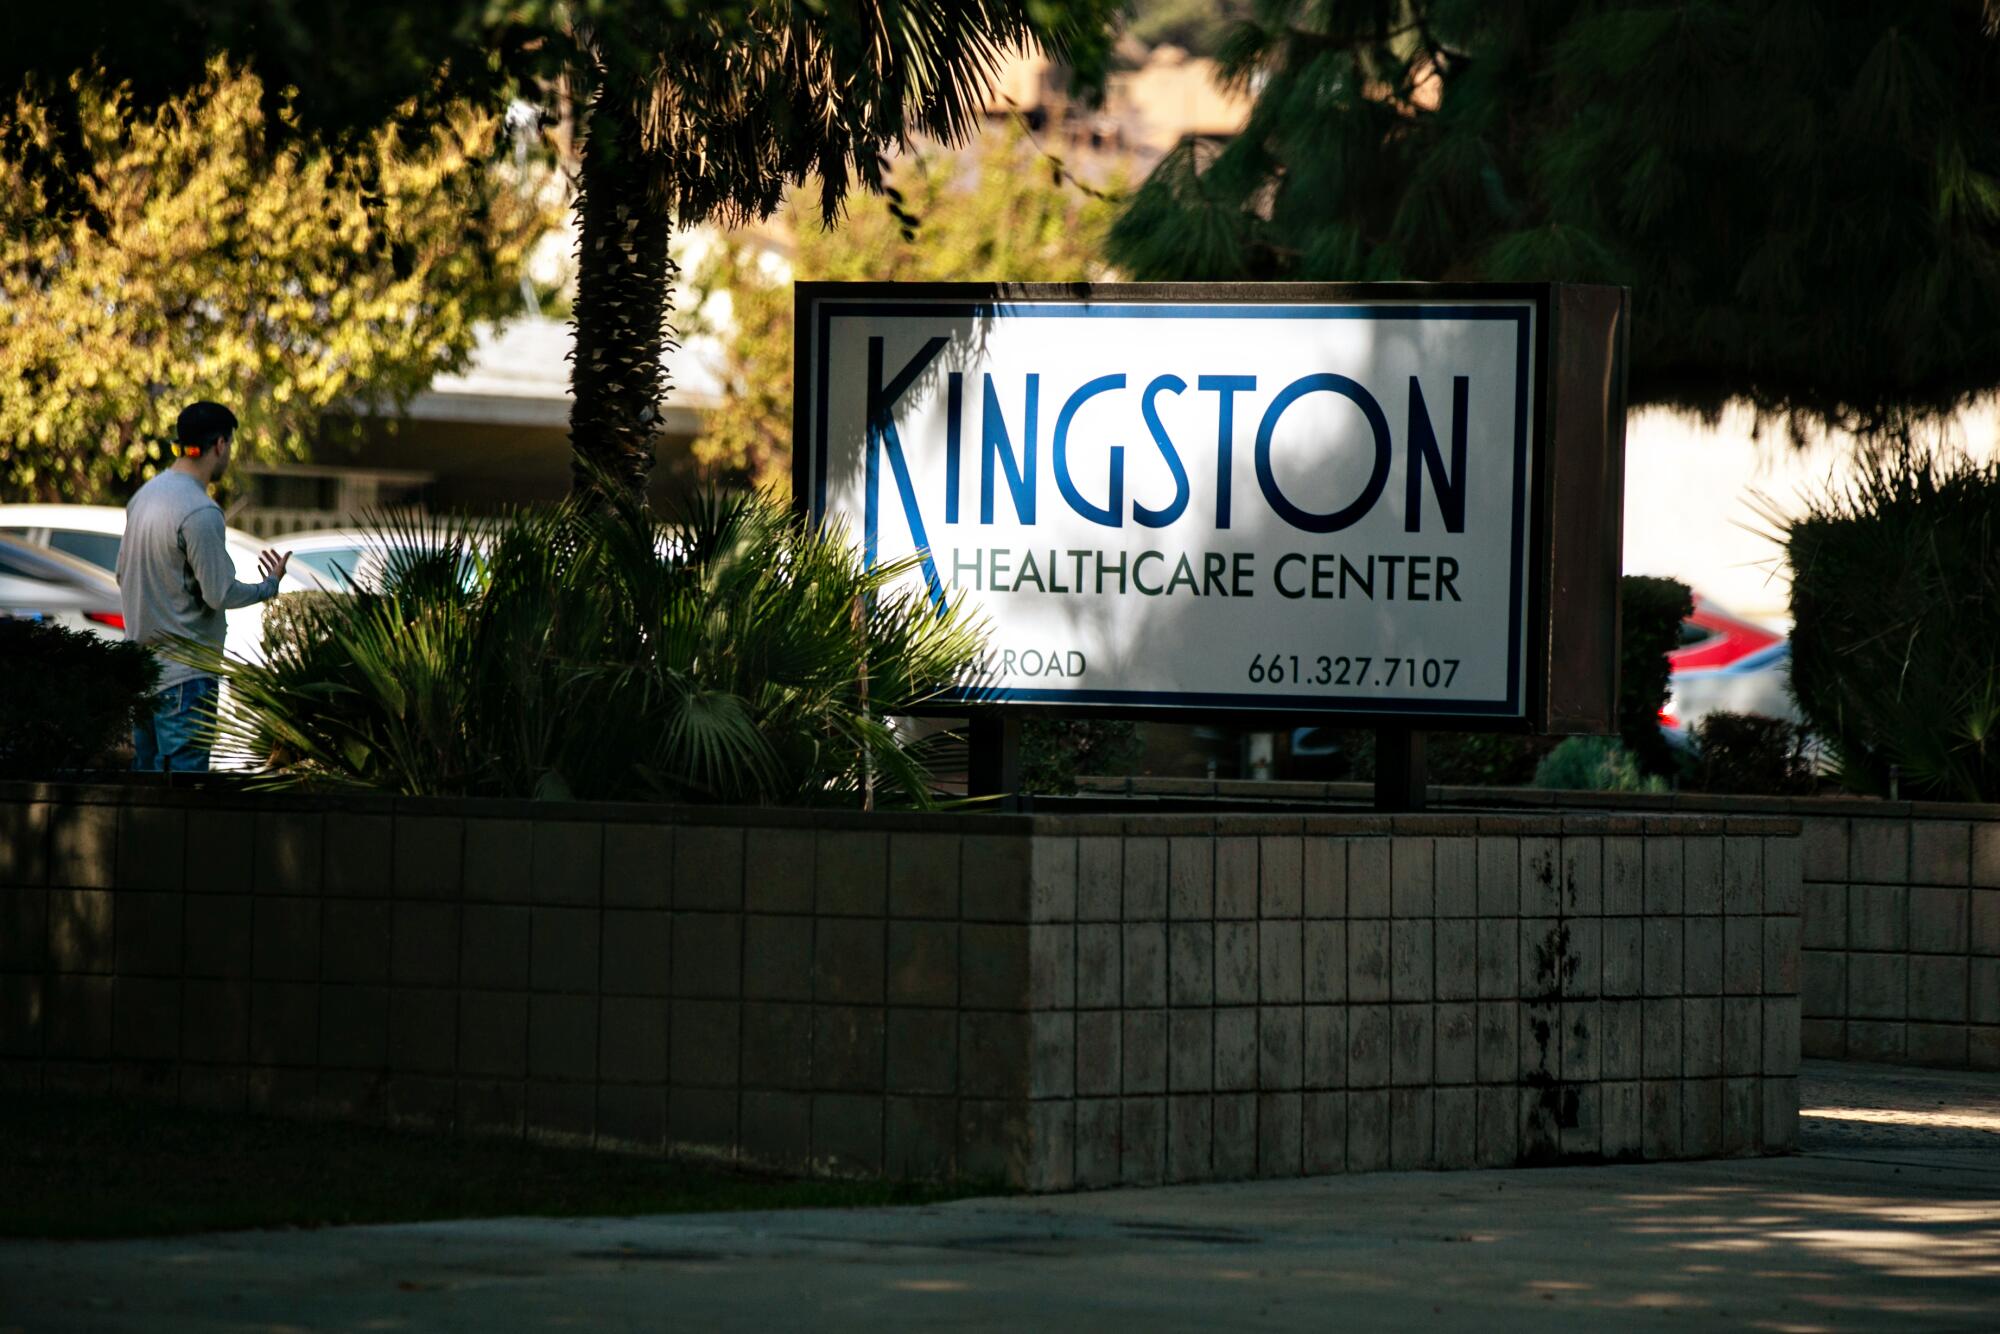 A sign shaded by trees identifies Kingston Healthcare Center